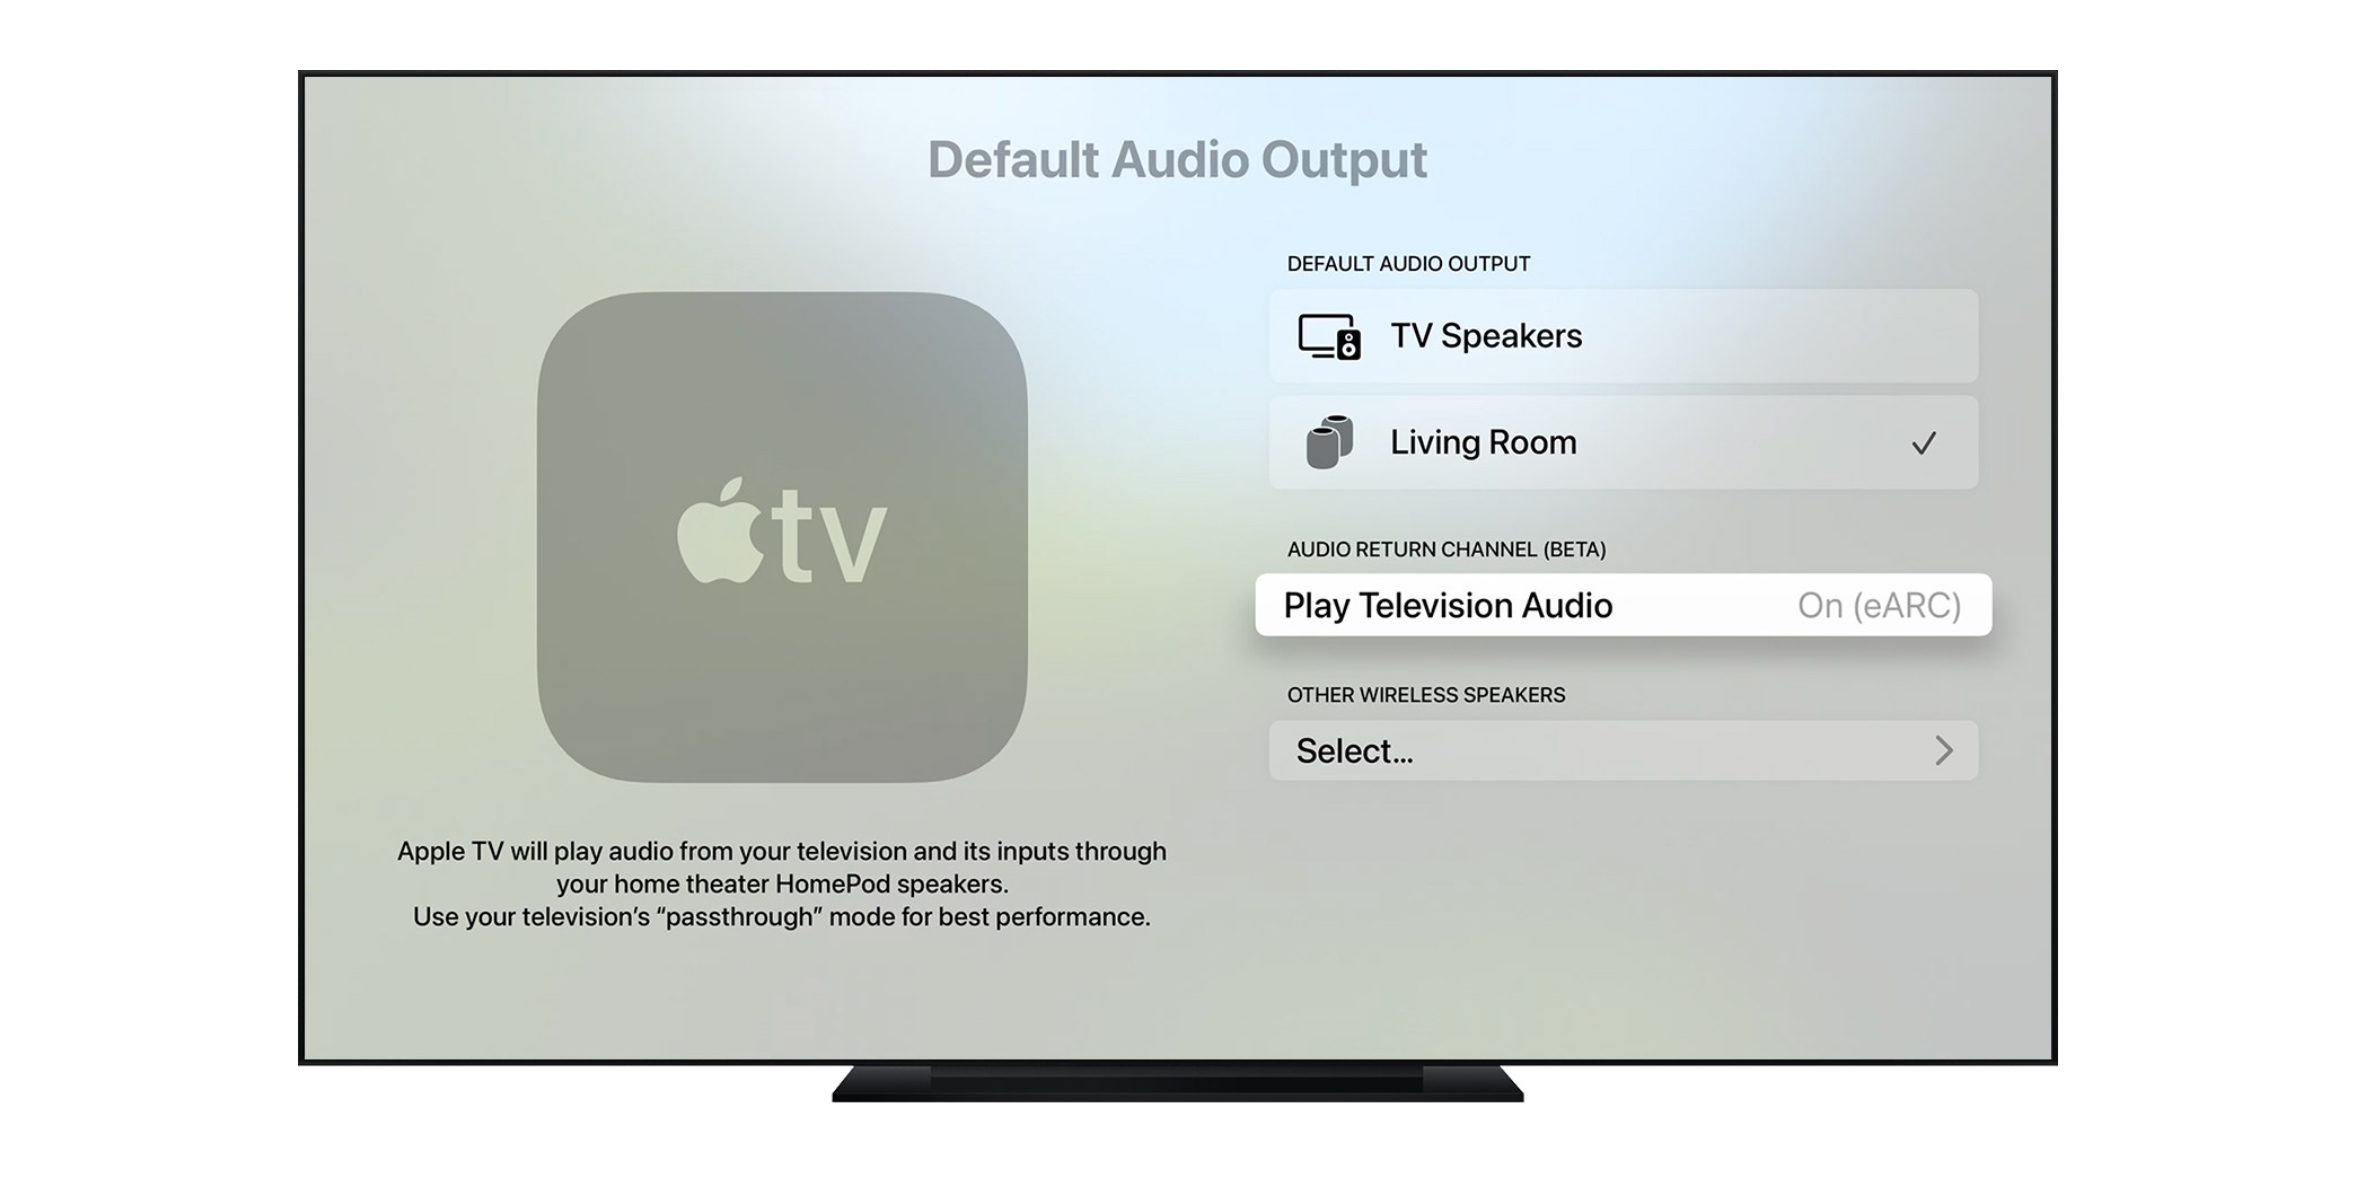 New TV adds ARC TV audio passthrough to HomePod speakers - 9to5Mac